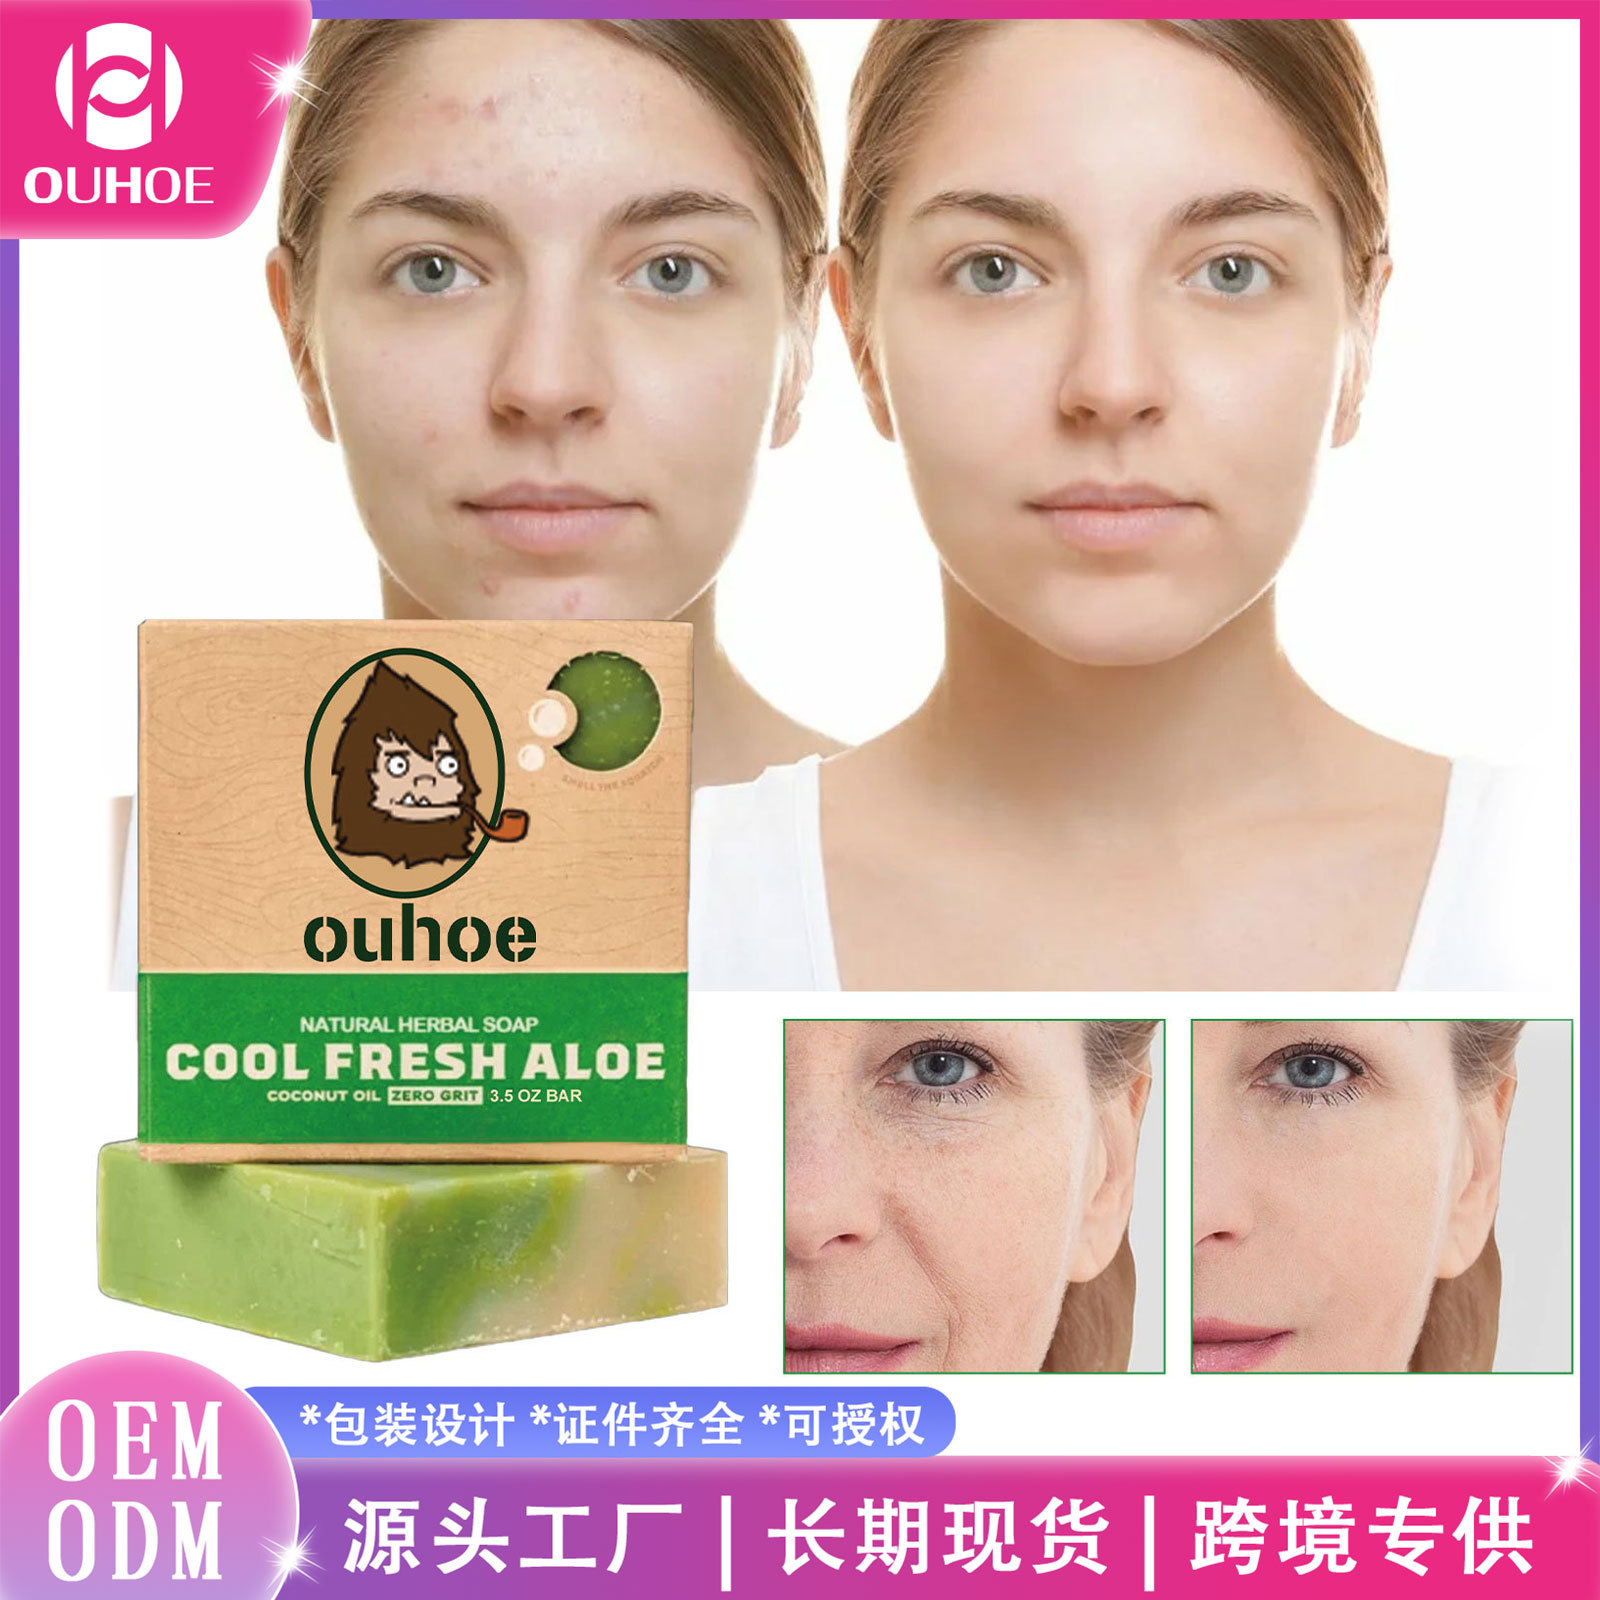 Ouhoe Herbal Cleansing Soap Smallpox Diluting Blackhead Acne Moisture Replenishment Repair Facial Skin Face Soap